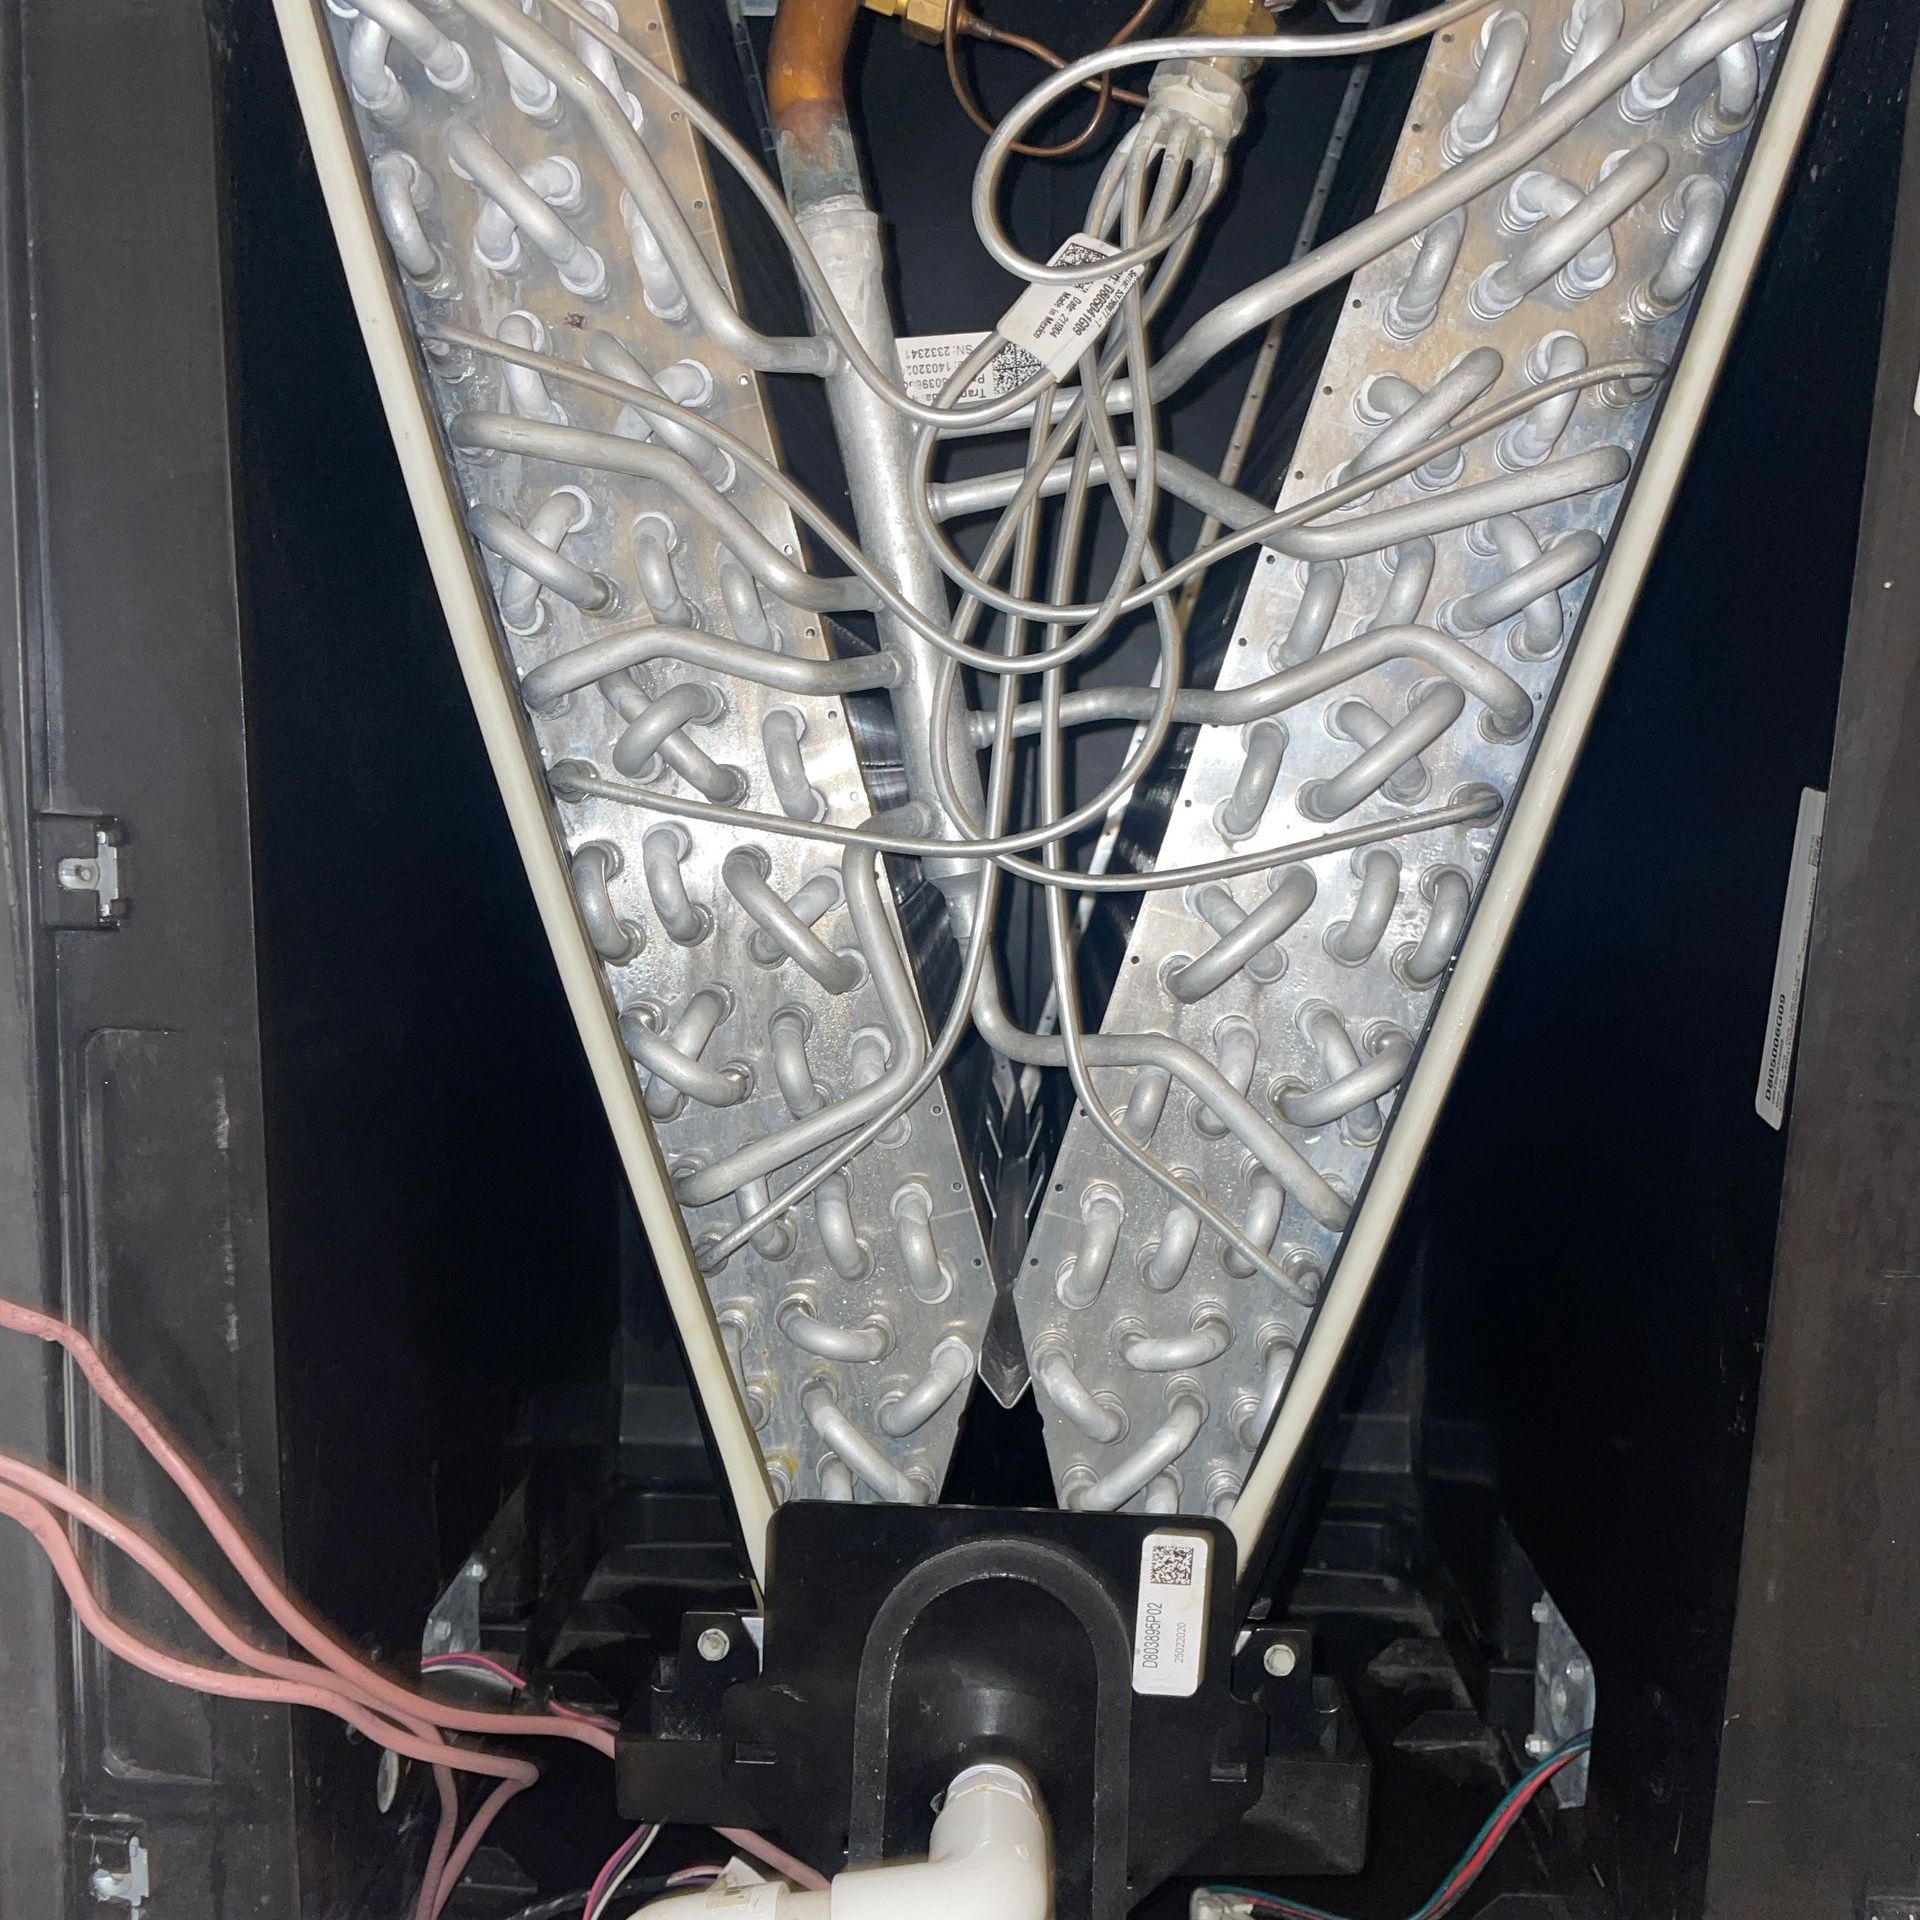 the inside of an air conditioner with a lot of wires coming out of it